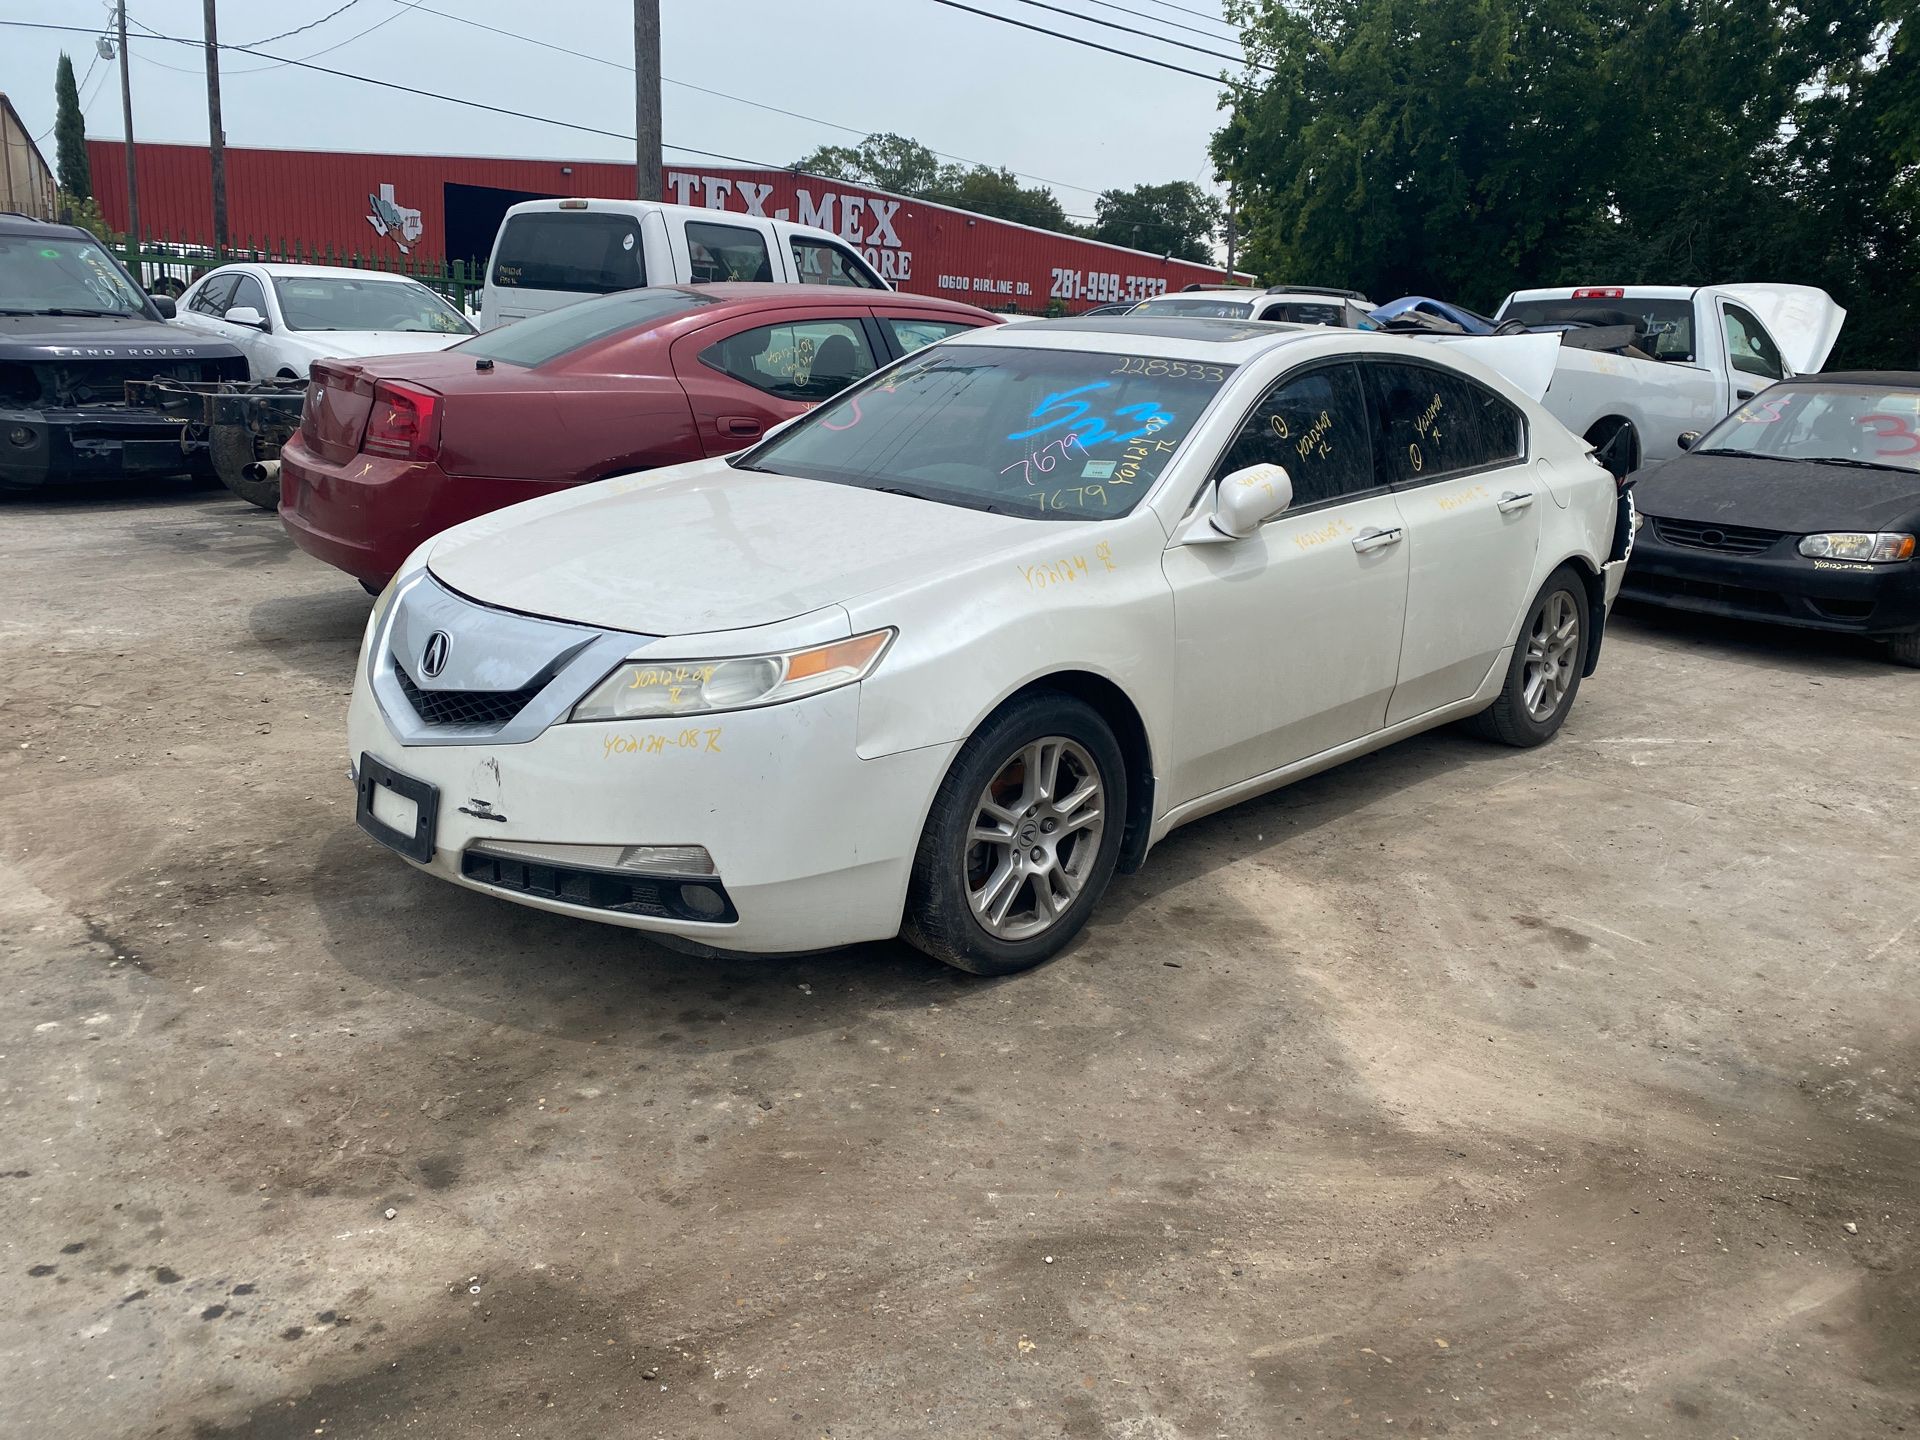 2009 Acura TL PARTING OUT. Parts